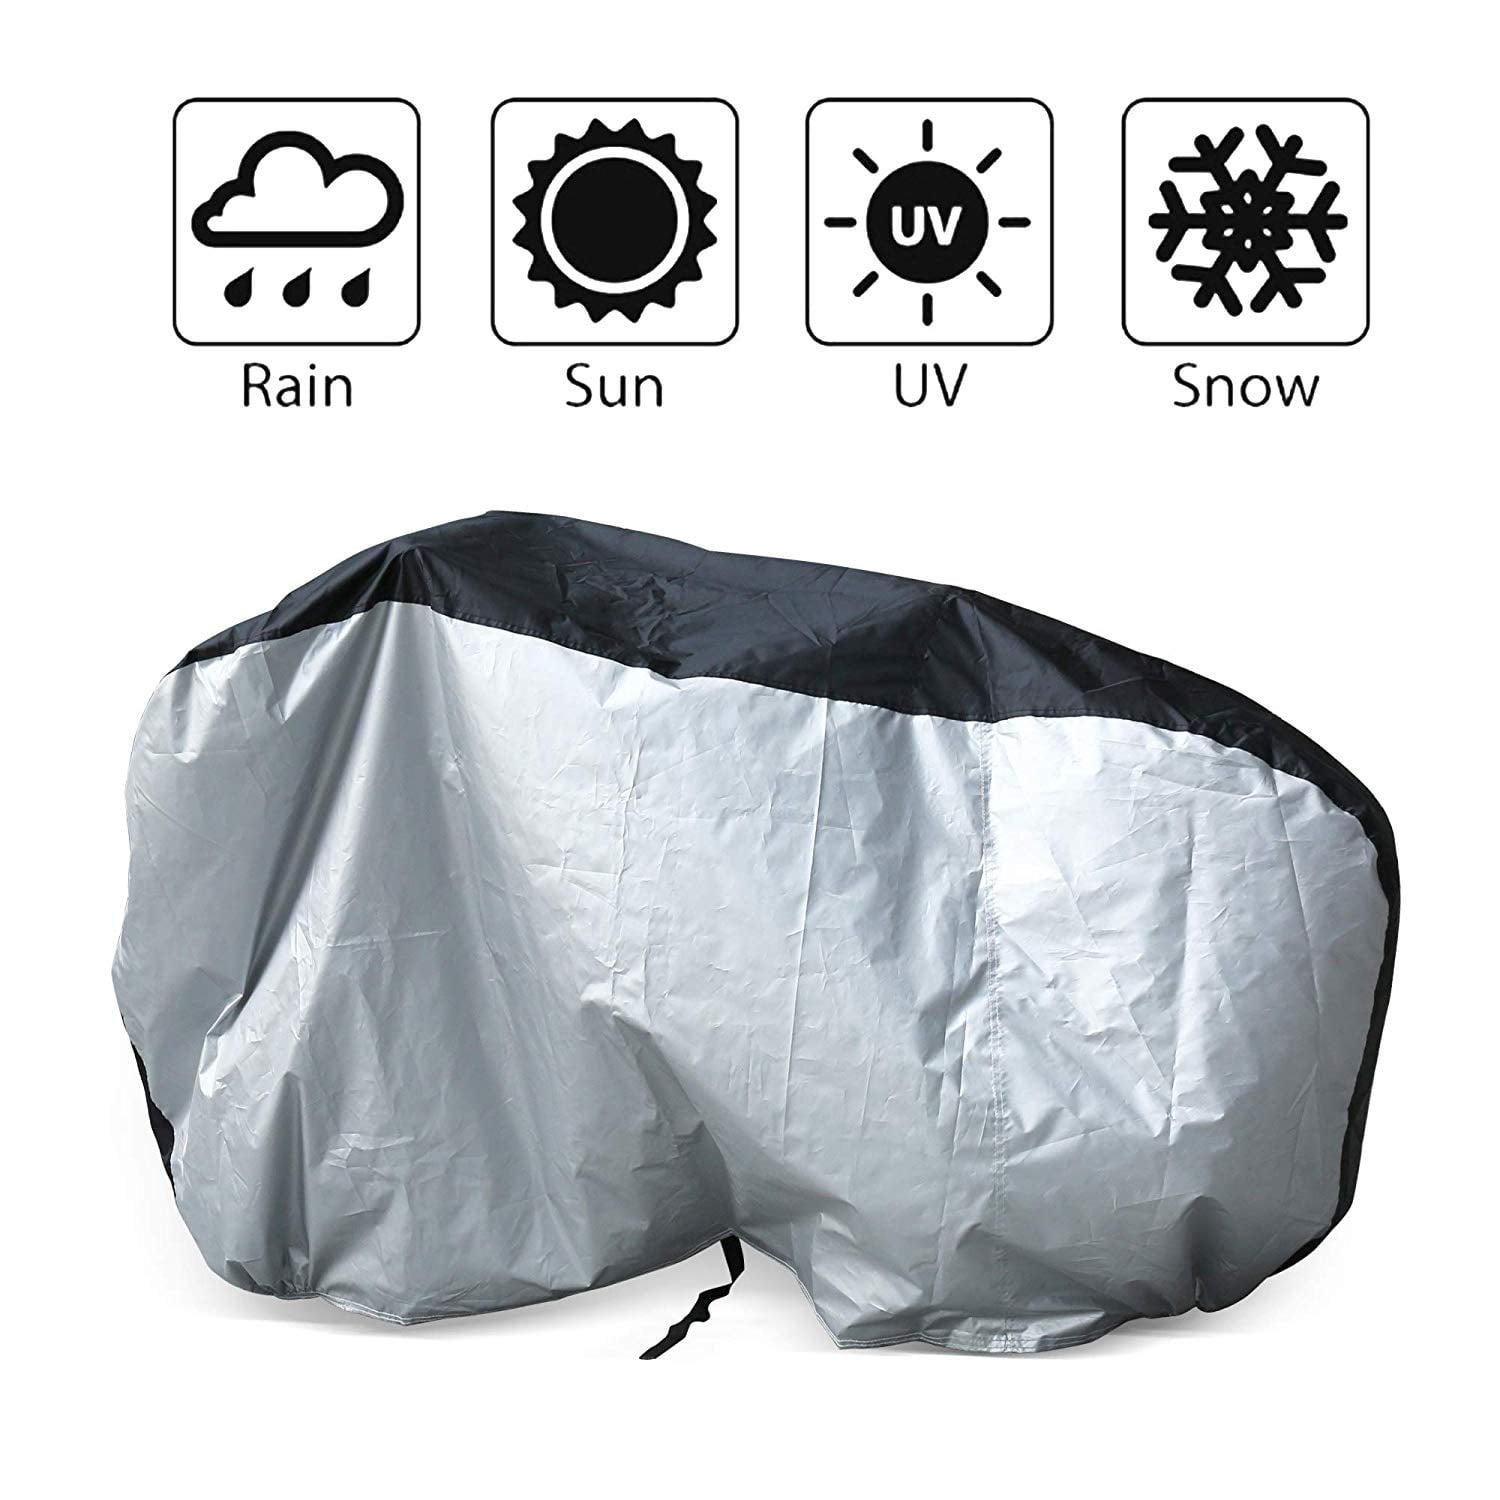 Washable Stretchy Fabric Cycling Travel Protection Bicycle Wheel Cover Scratch-Proof Gear Tire Cover for MTB Bike/Road Bike Choumia Bike Indoor Storage Cover Dustproof Storage Bag for Bicycle 